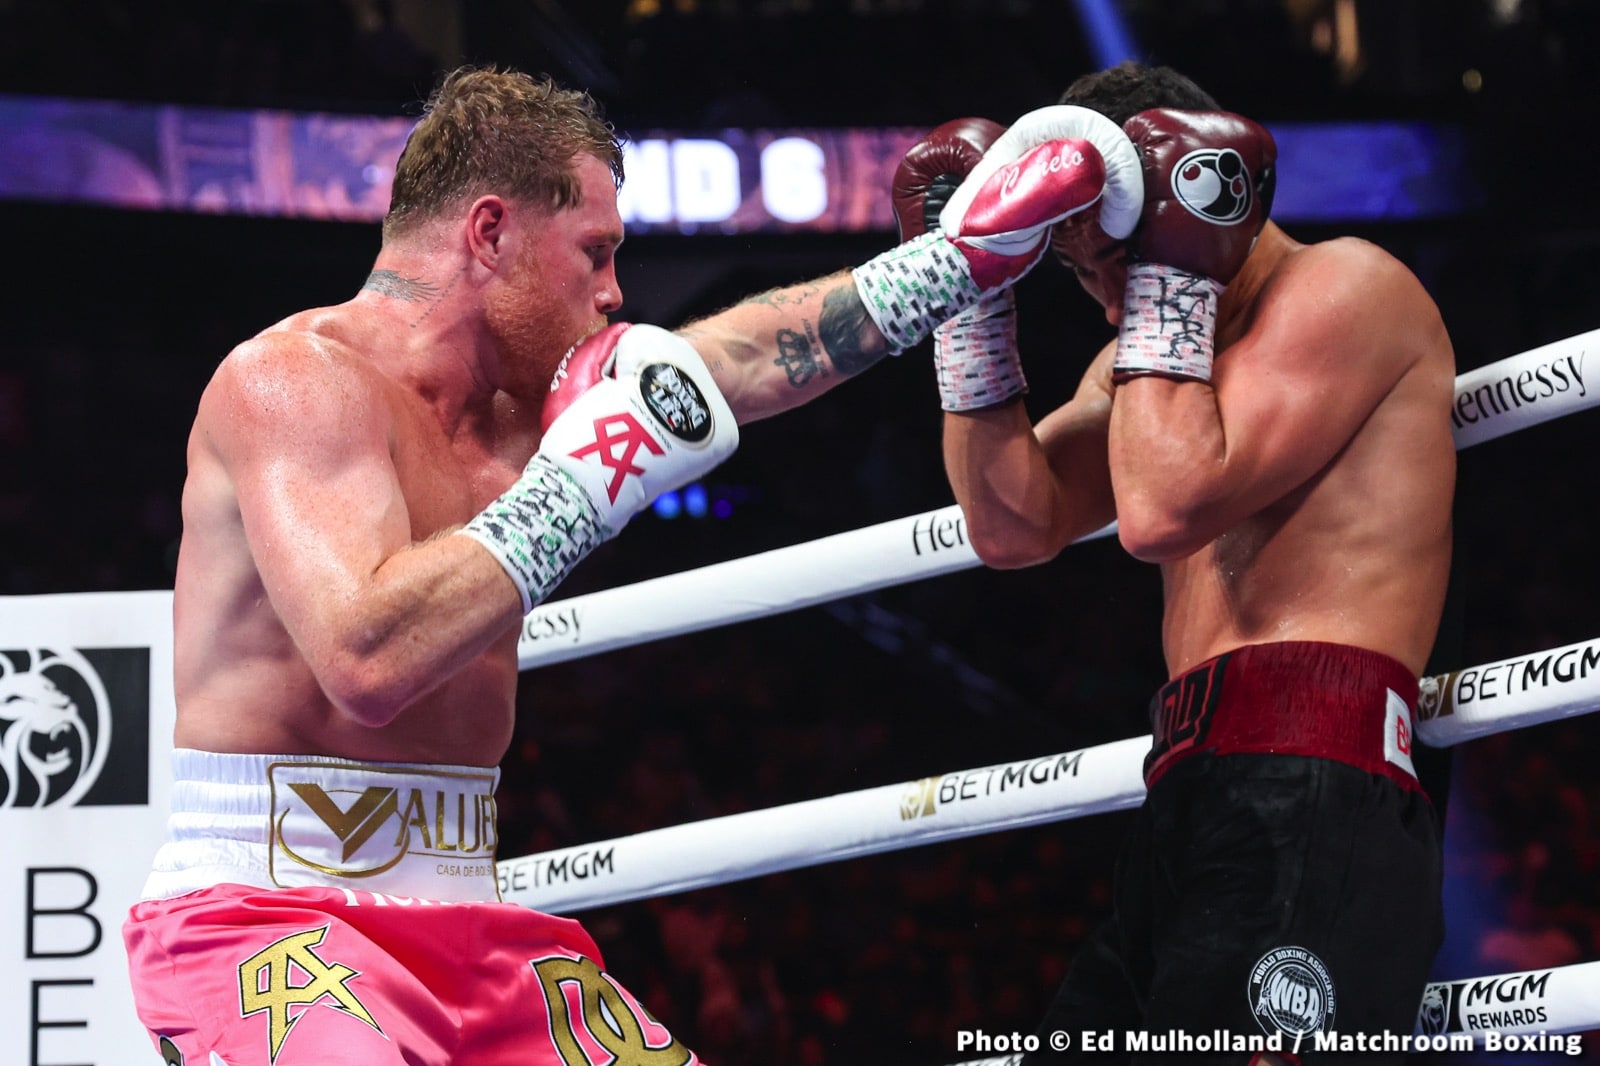 Image: Canelo Alvarez vs. John Ryder being finalized for May 6th in Jalisco, Mexico